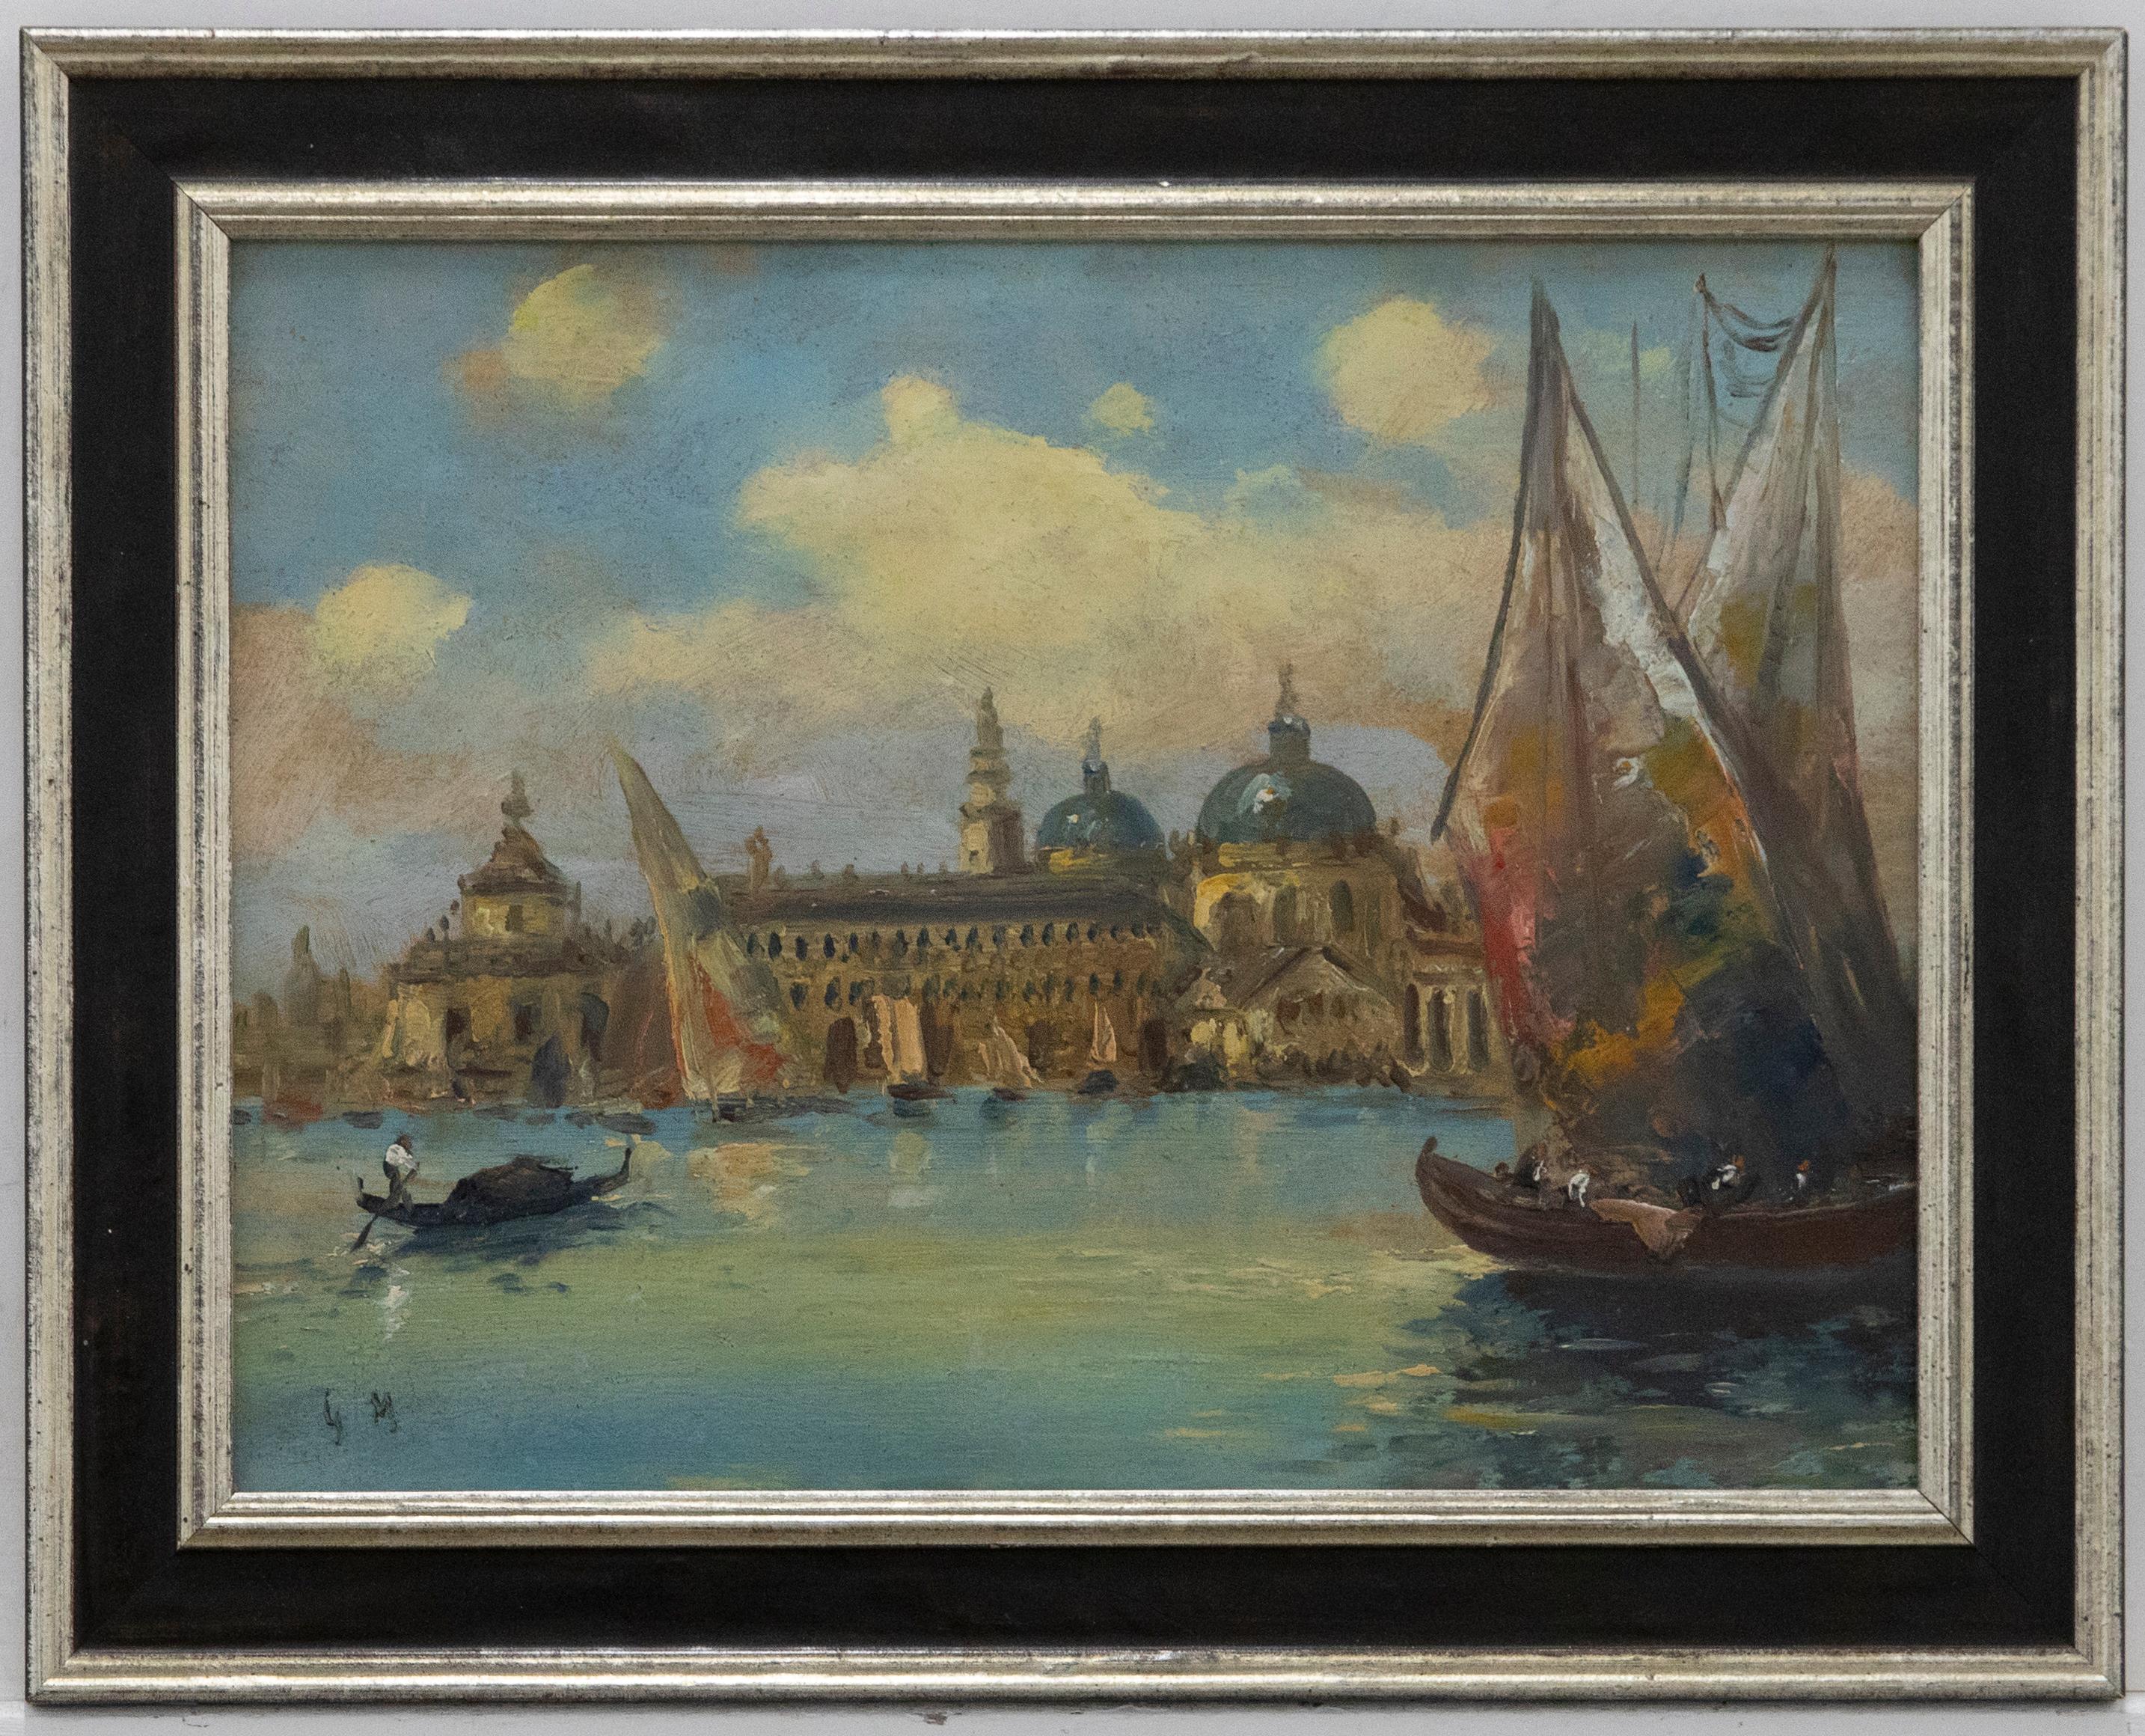 A fine 20th Century oil view of Venice in the sunlight, with the imposing and infamous silhouette of the Basilica di Santa Maria della Salute dominating the skyline. The artist has initialed to the lower left corner and the painting has been